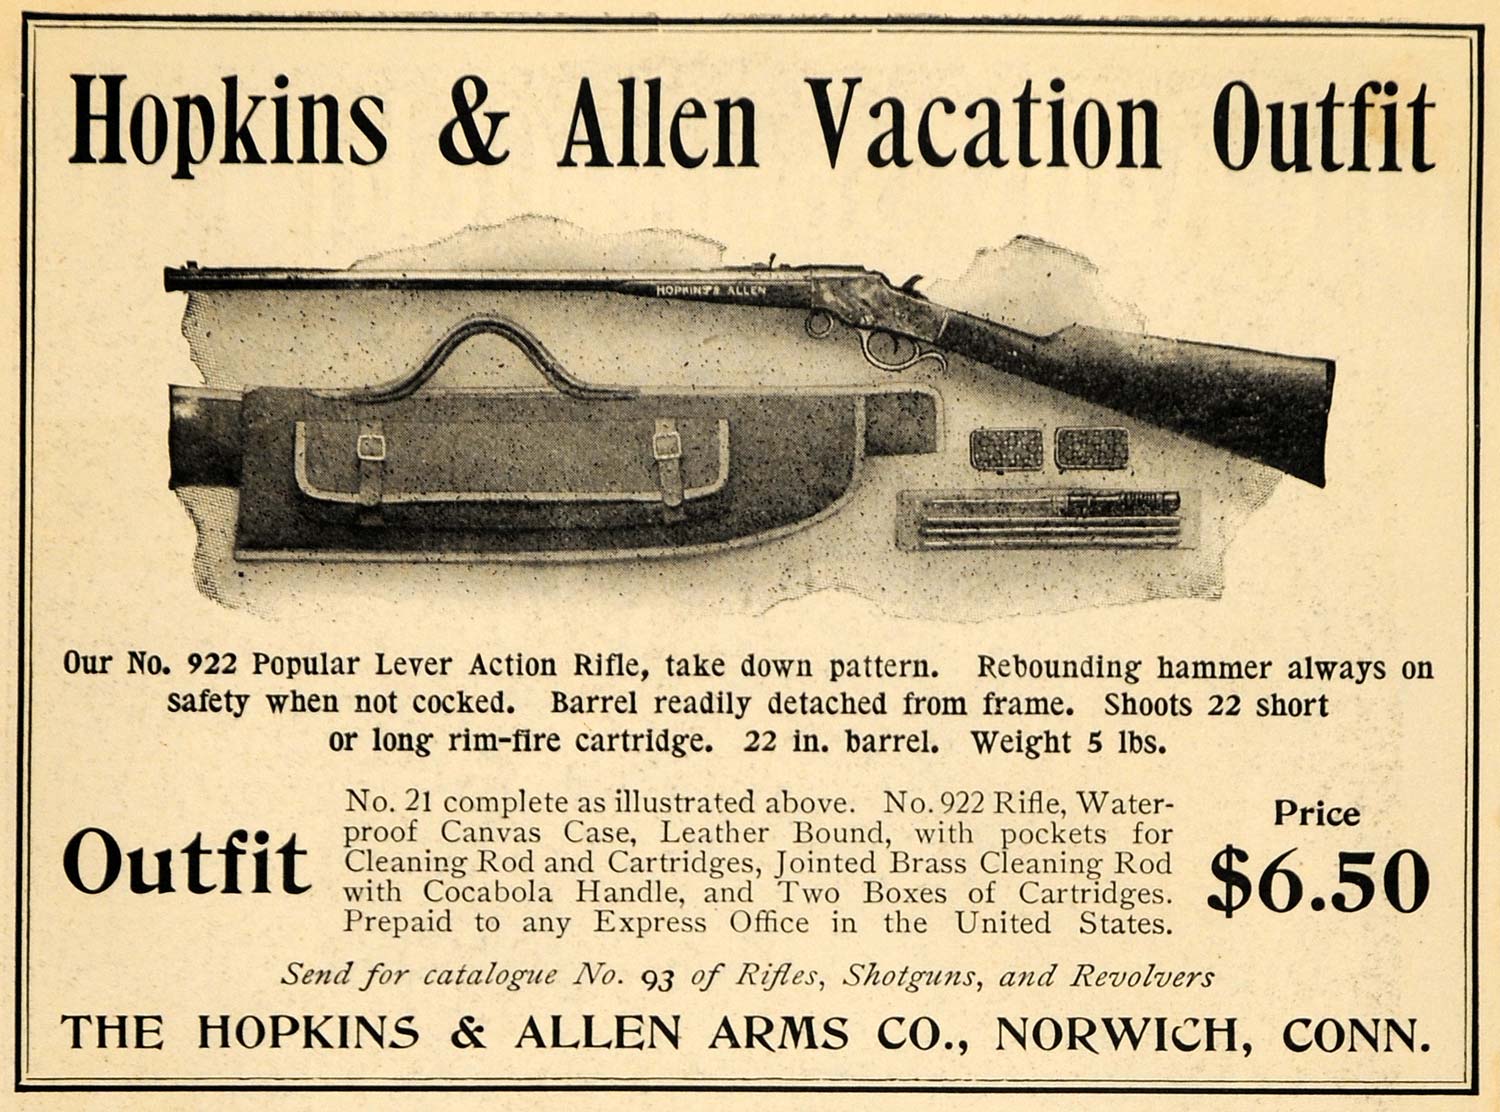 1904 Ad Hopkins & Allen Vacation Outfit 922 Rifle Case - ORIGINAL TOM1